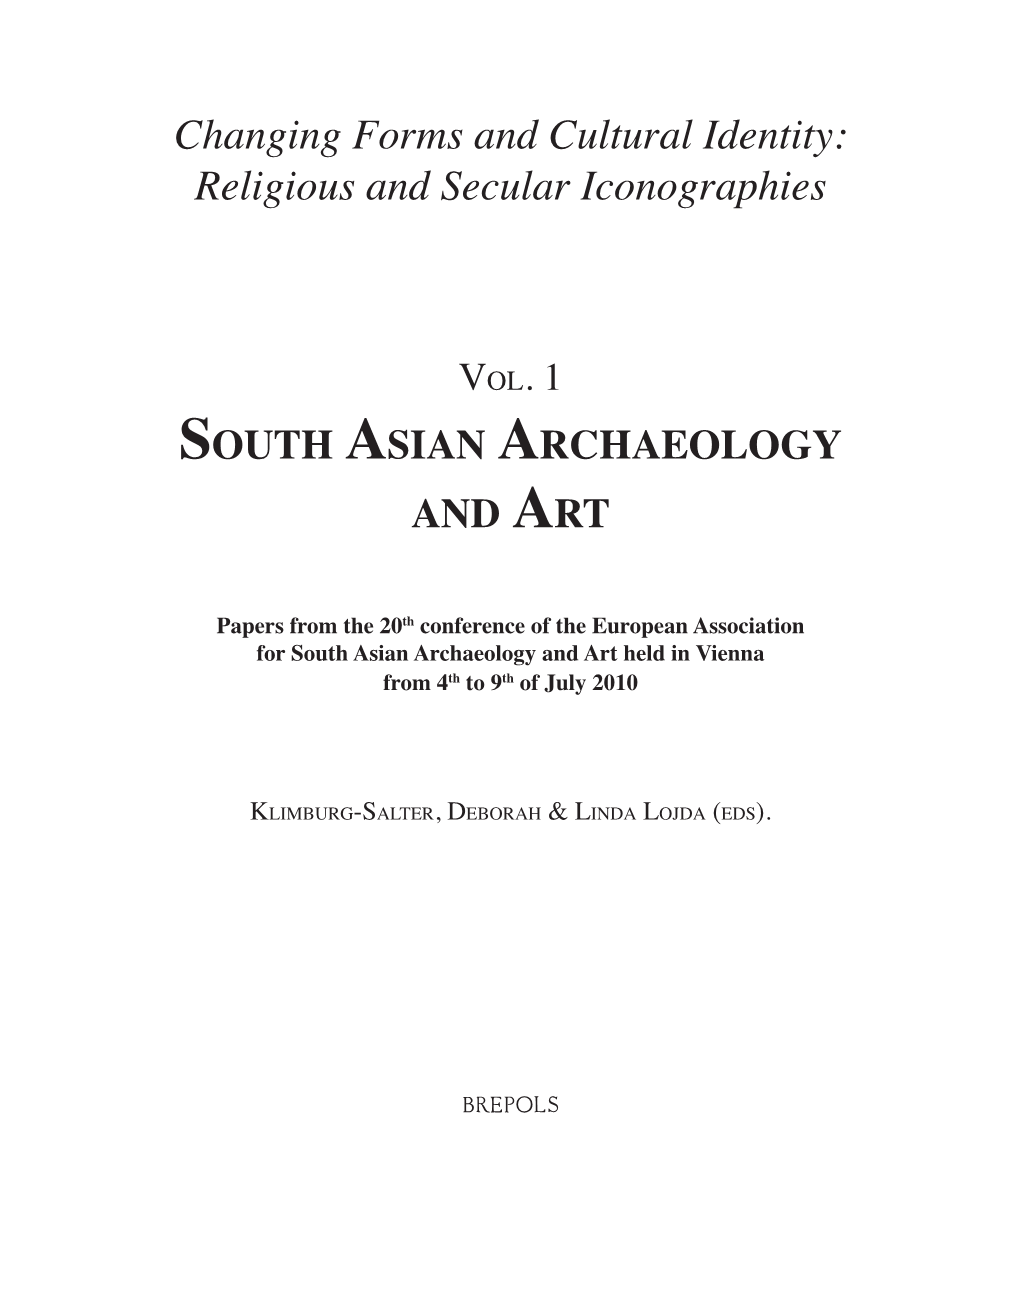 Changing Forms and Cultural Identity: Religious and Secular Iconographies